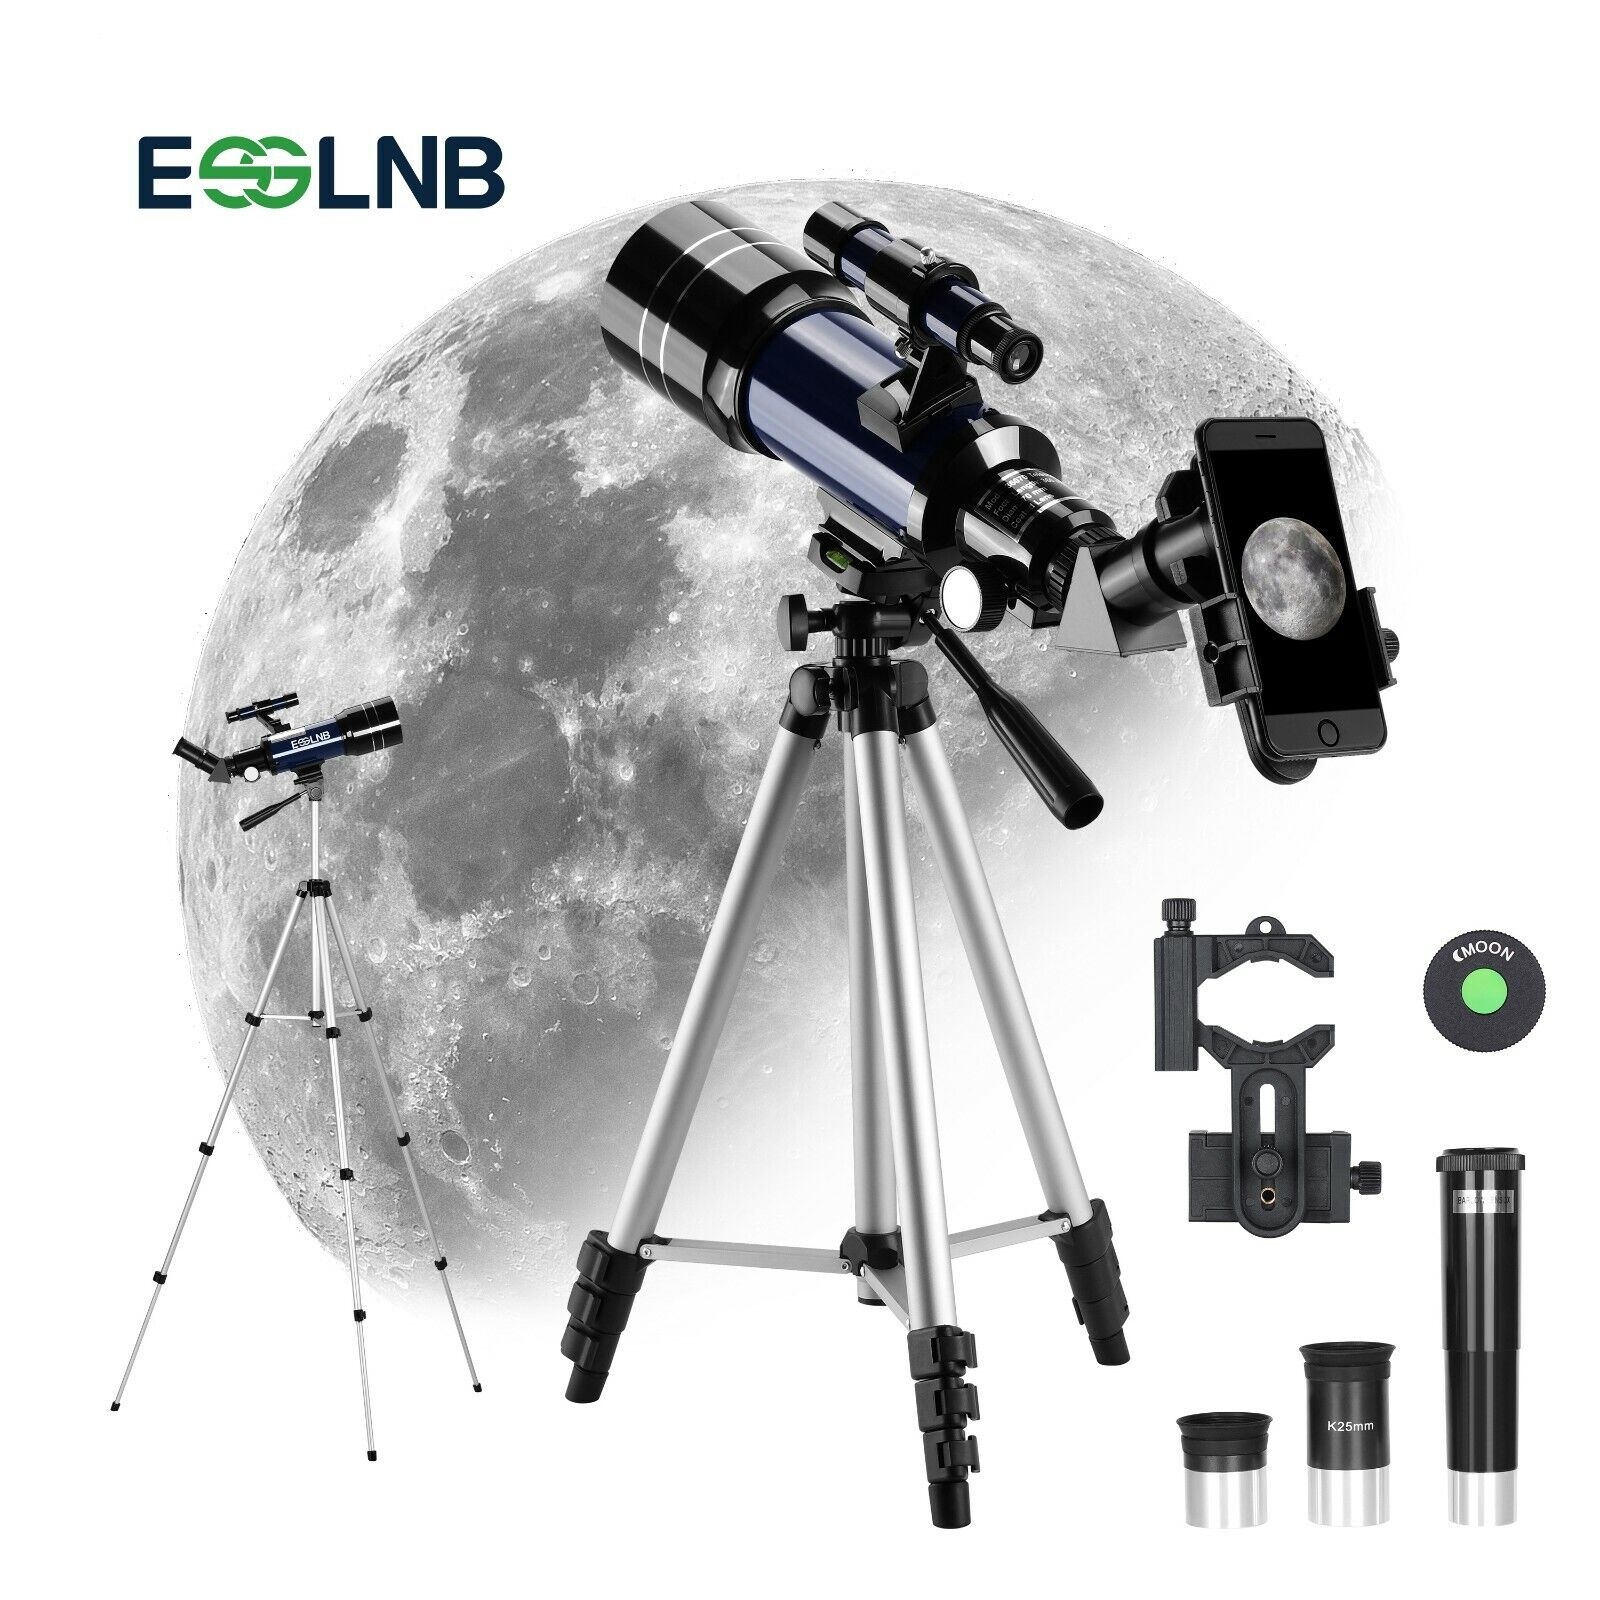 70mm Lens Telescope Adjustable Tripod Mobile Holder 3X Barlow for Moon Watching